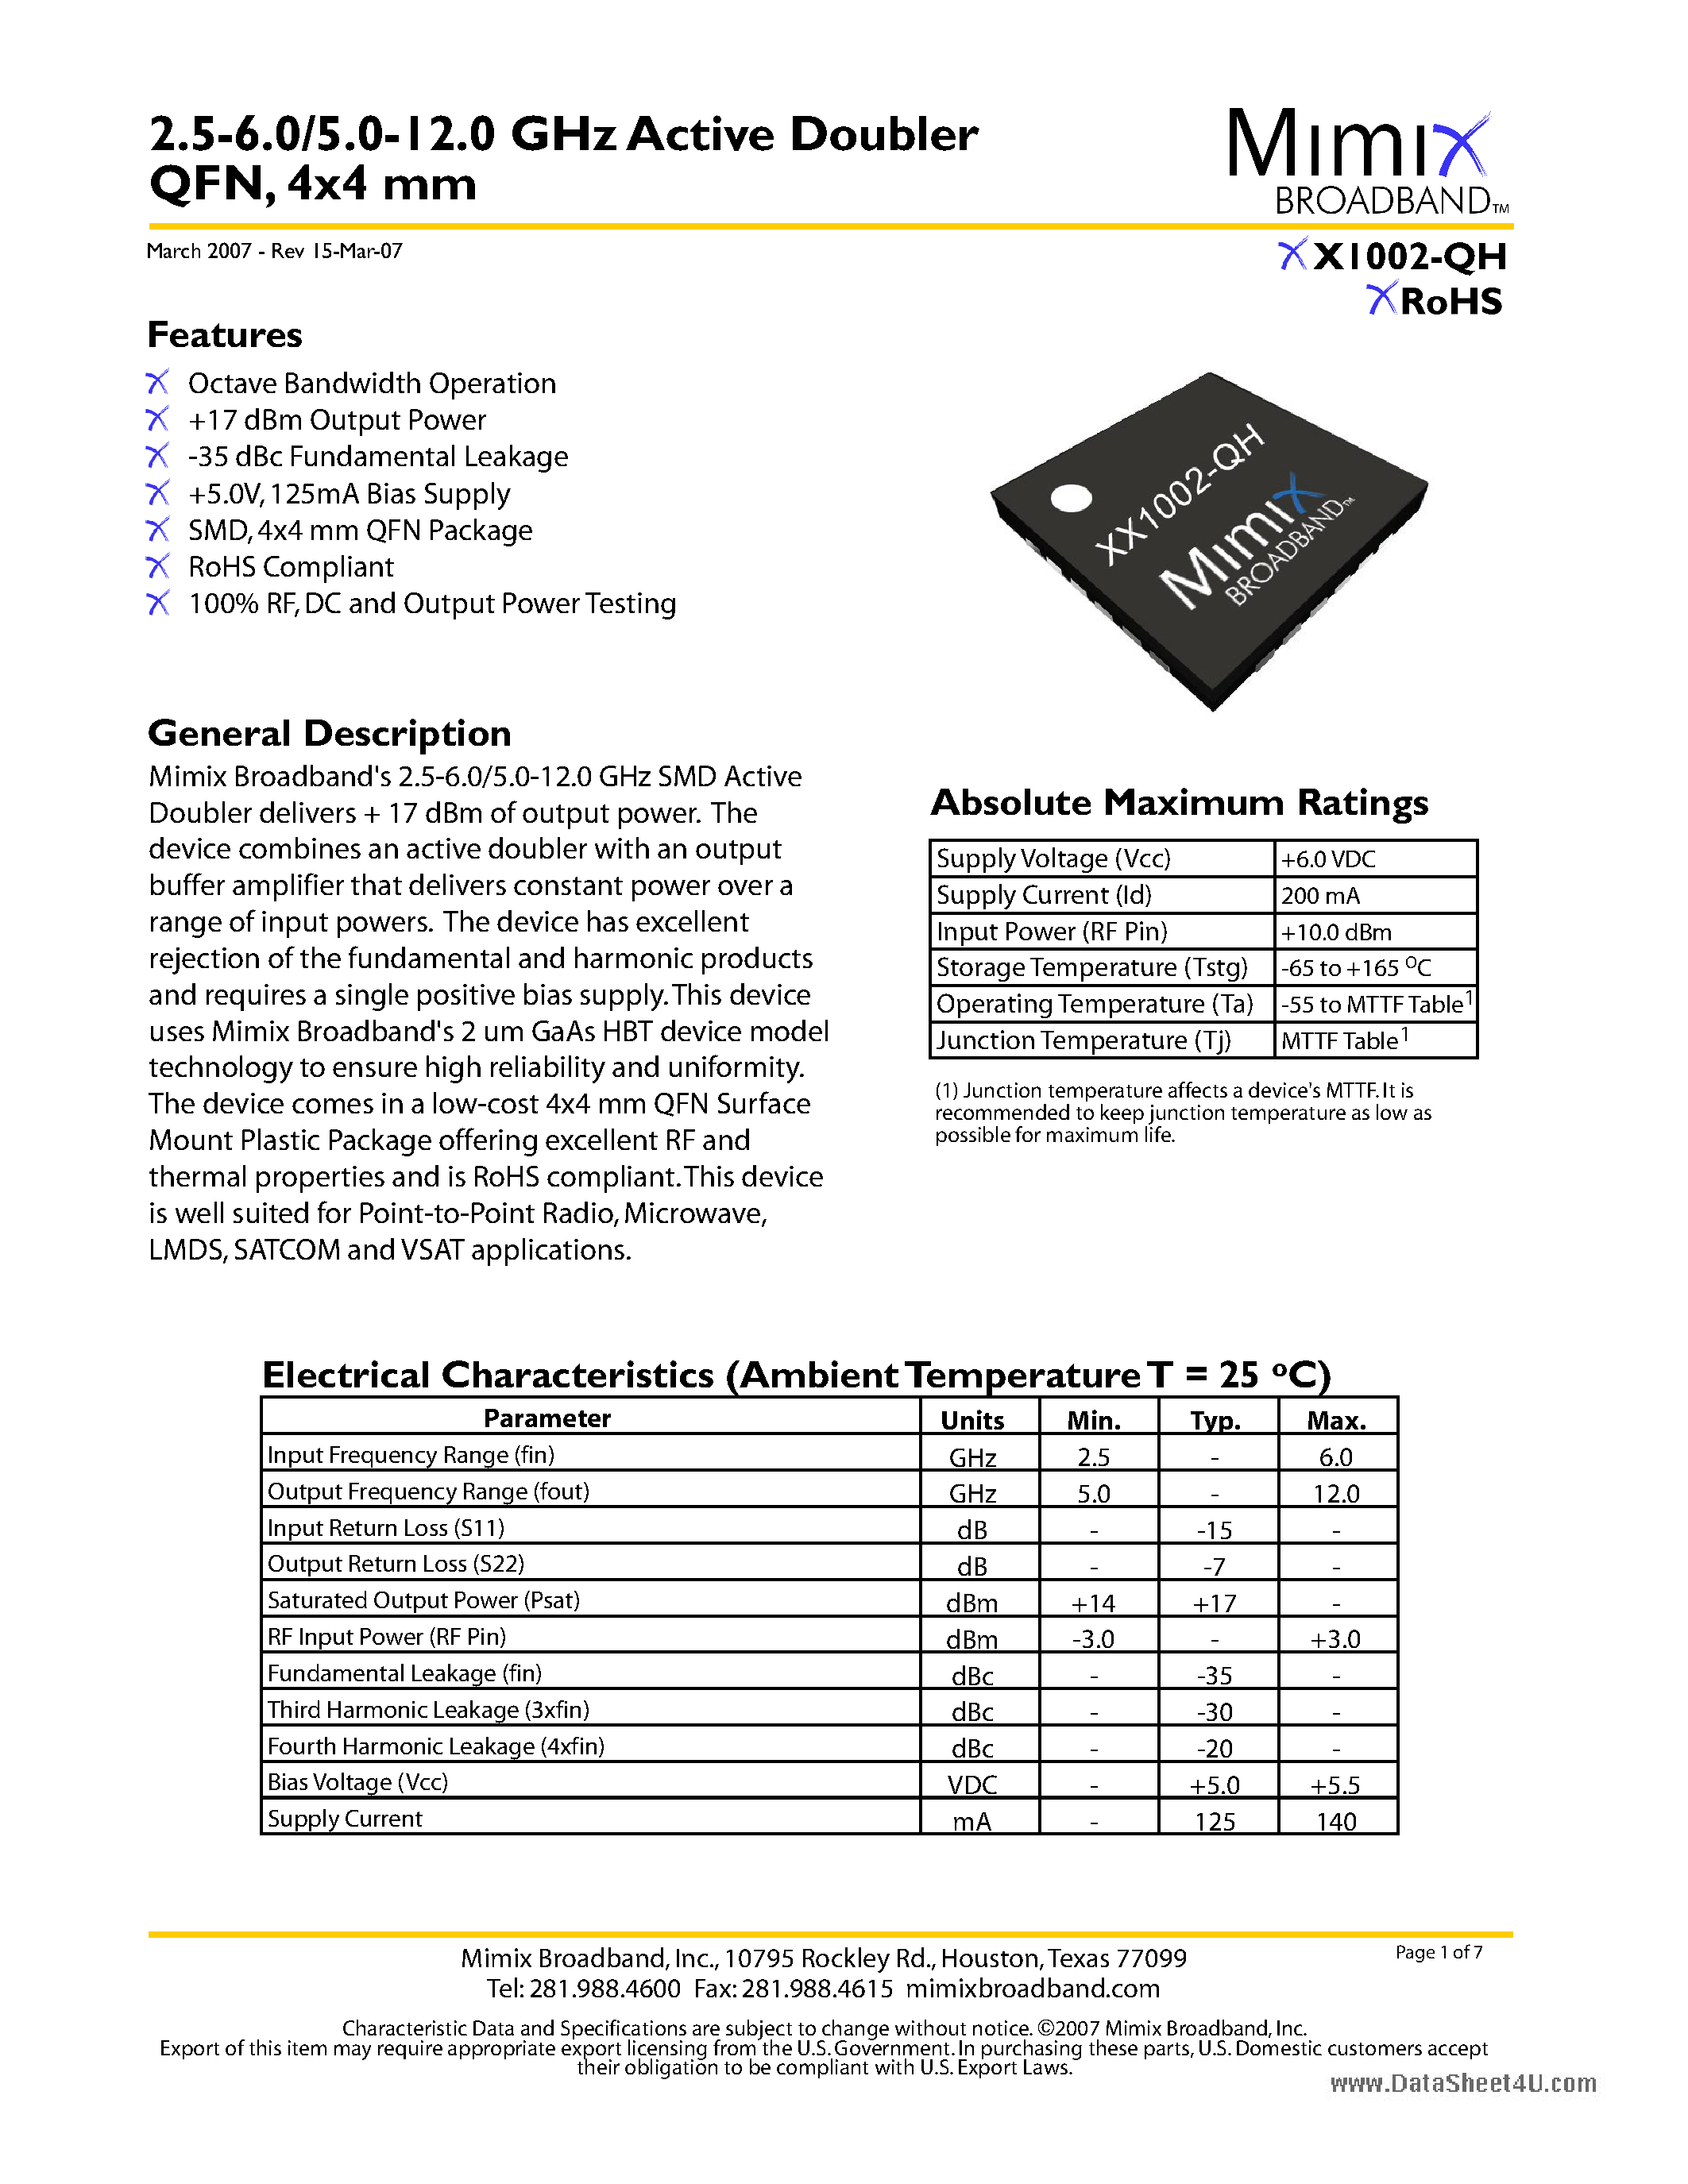 Datasheet XX1002-QH - Active Doubler page 1